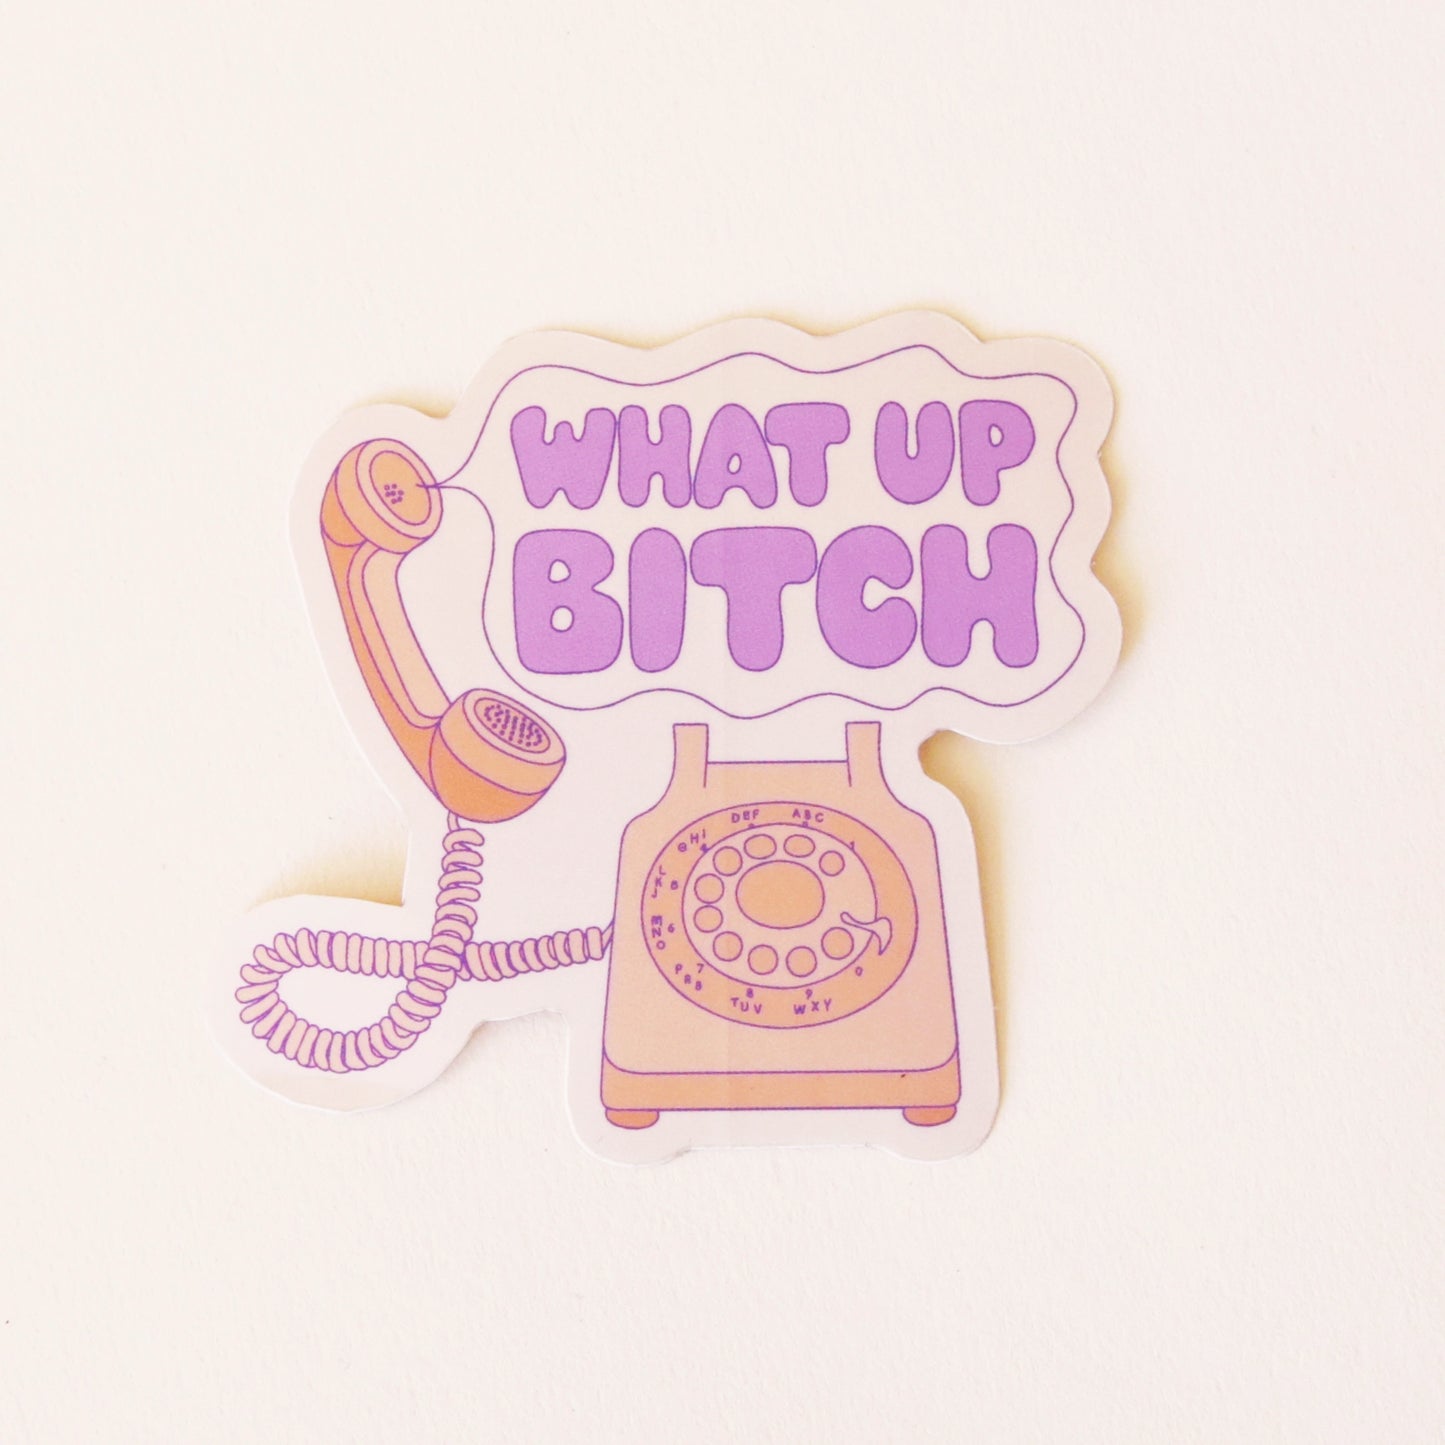 On a cream background is a vinyl sticker of an old school pink phone with a speech bubble coming out of the phone that reads, "What Up Bitch" in purple letters.